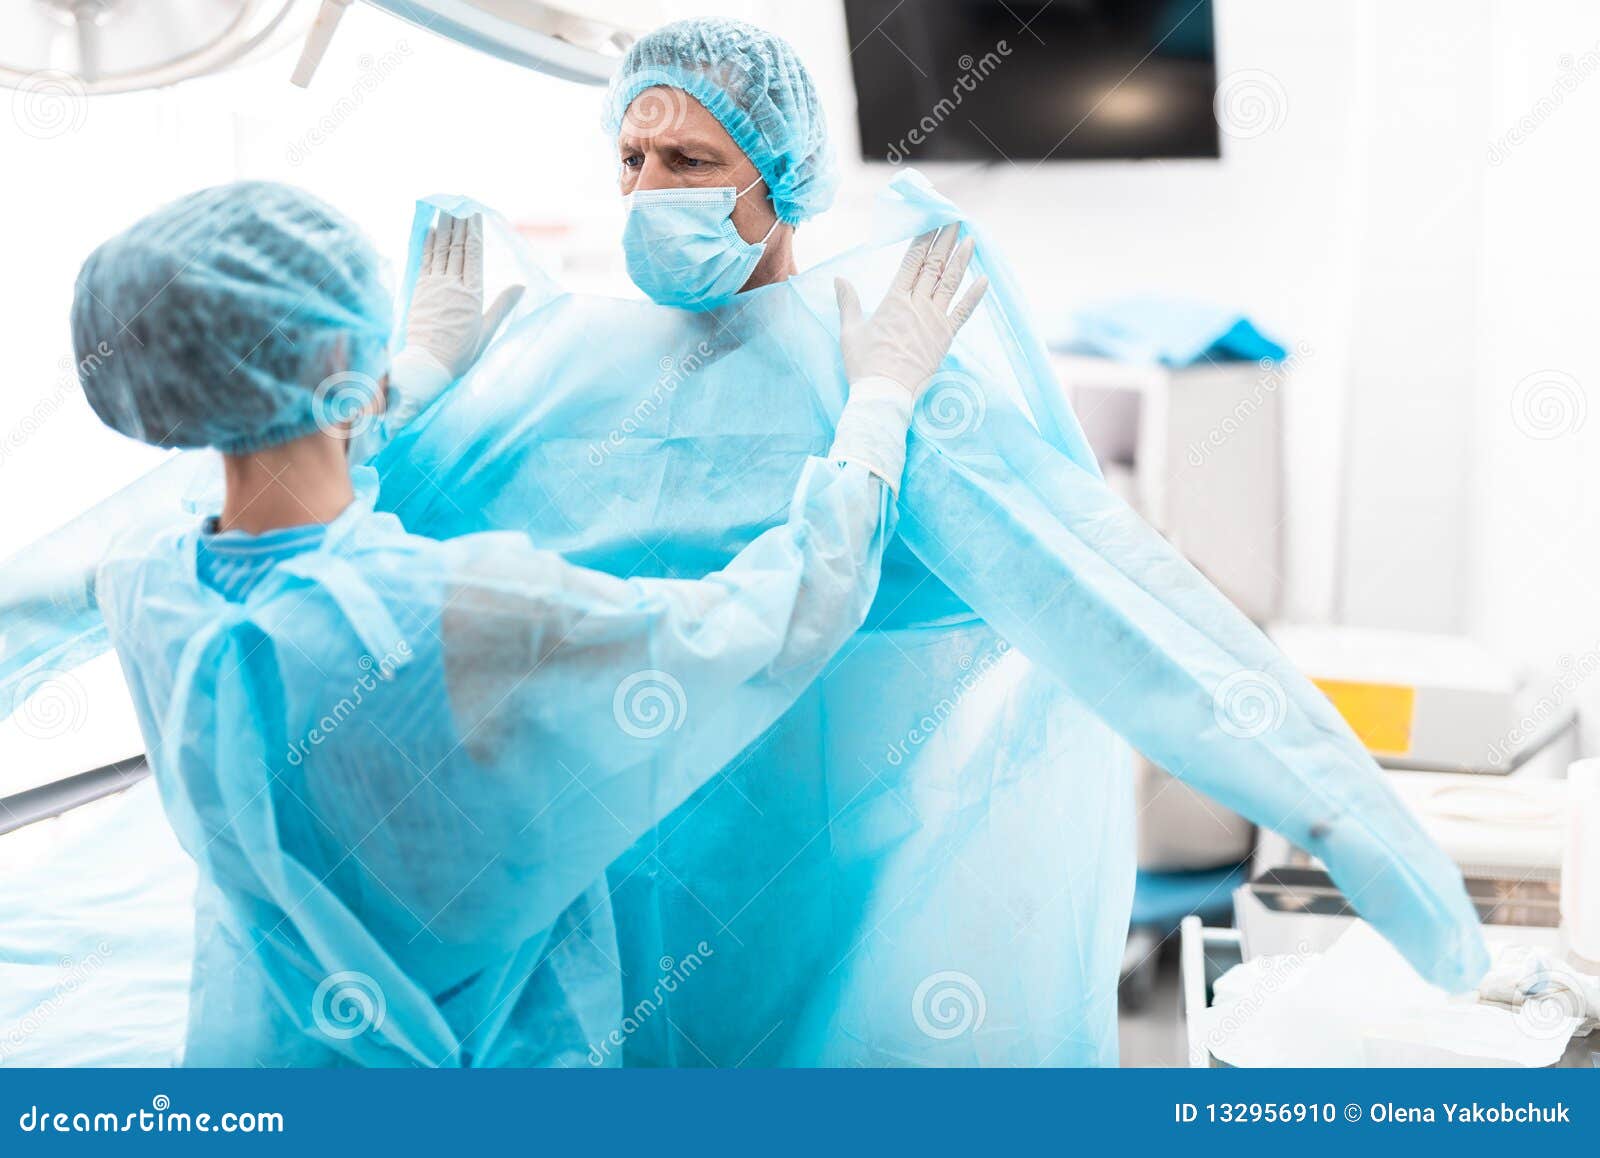 assistant helping surgeon to prepare for surgical operation